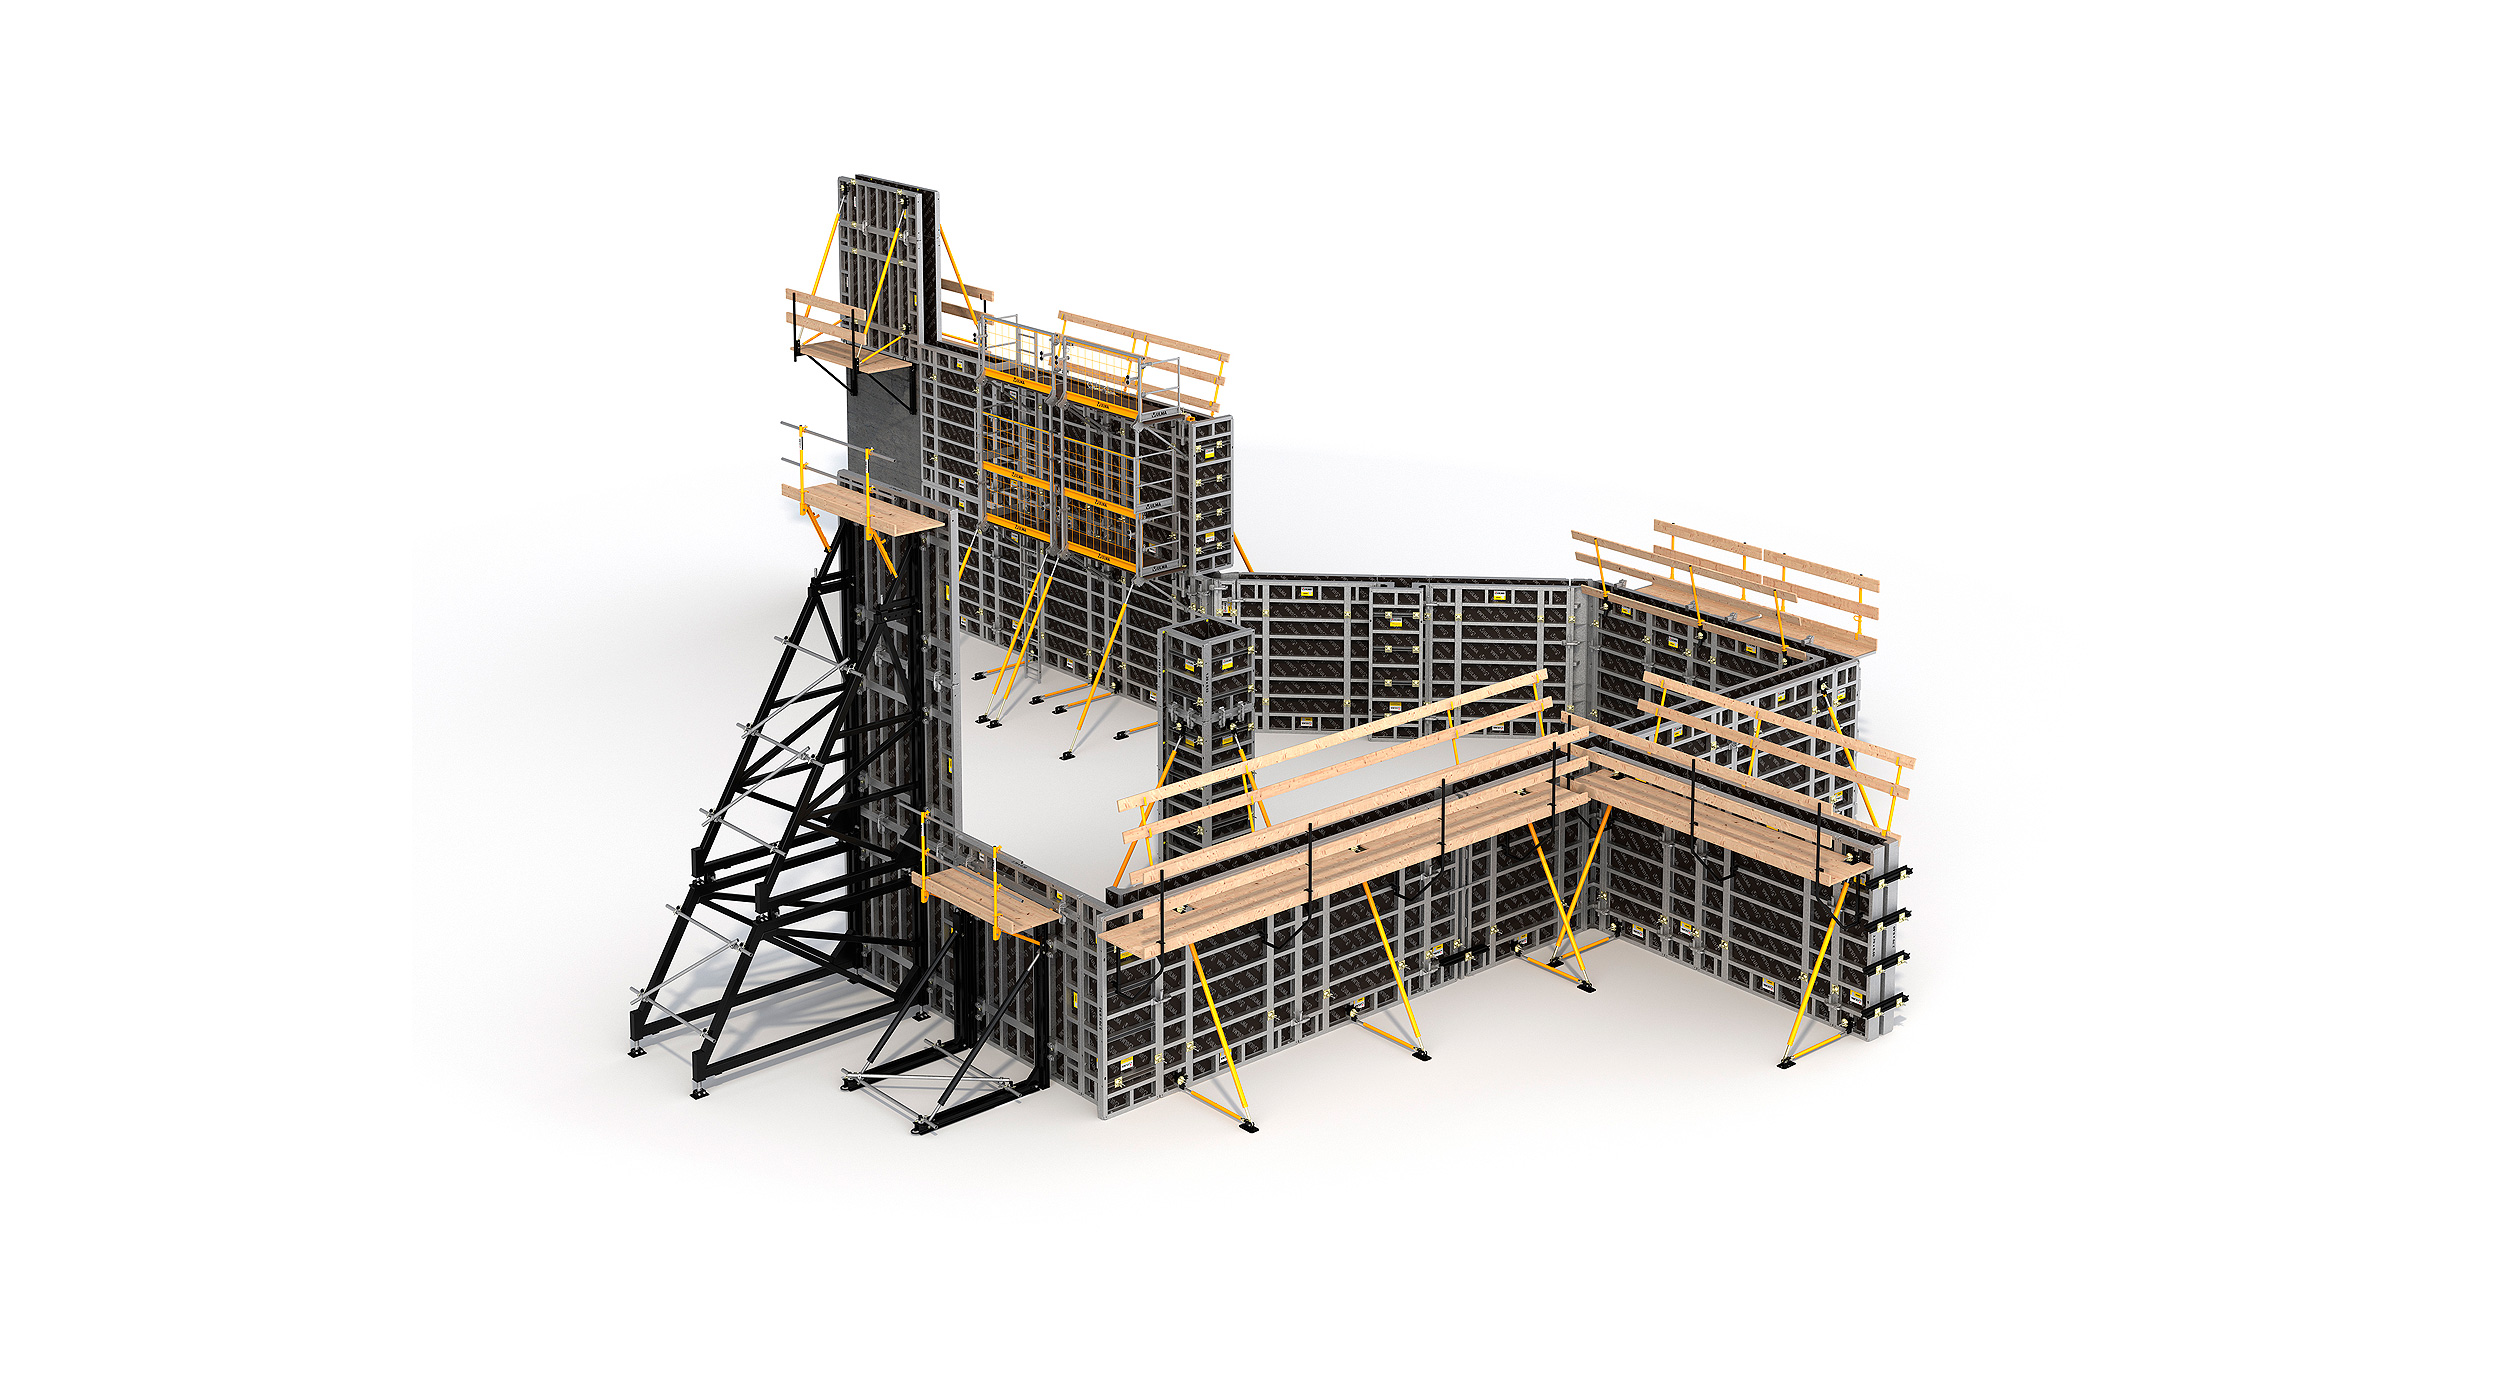 Modular formwork system for the construction of any vertical concrete structure. Highlights: high performance rates at minimum labour cost.